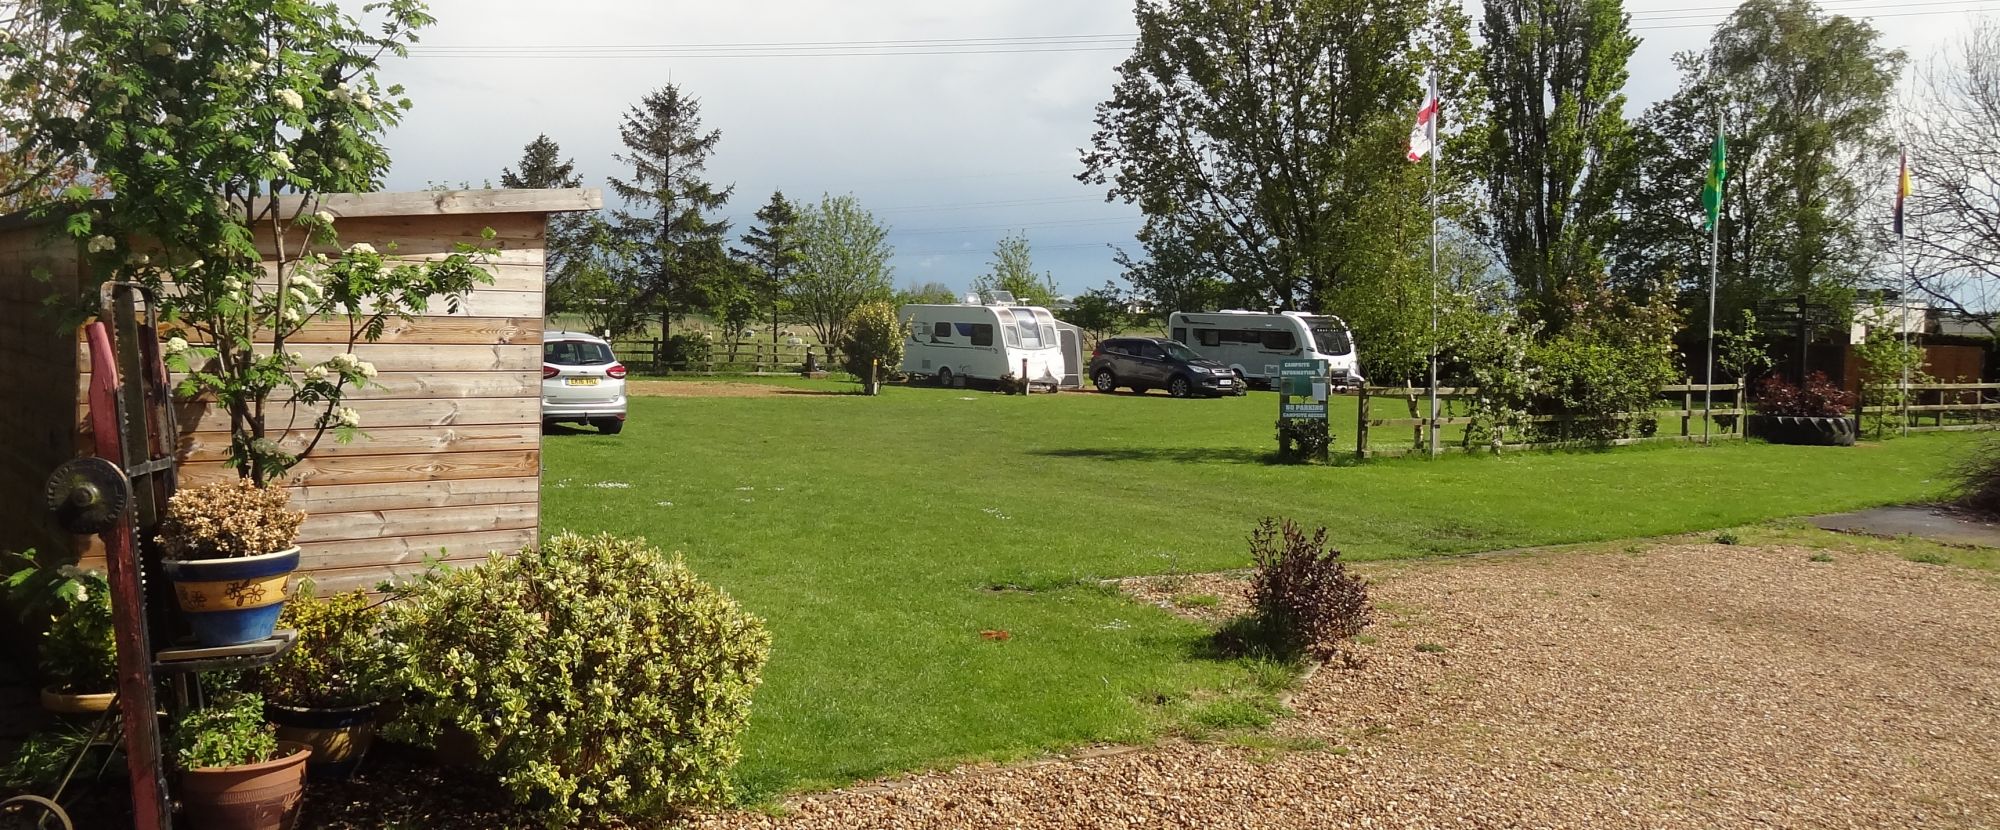 Certified Fully-serviced Campsite